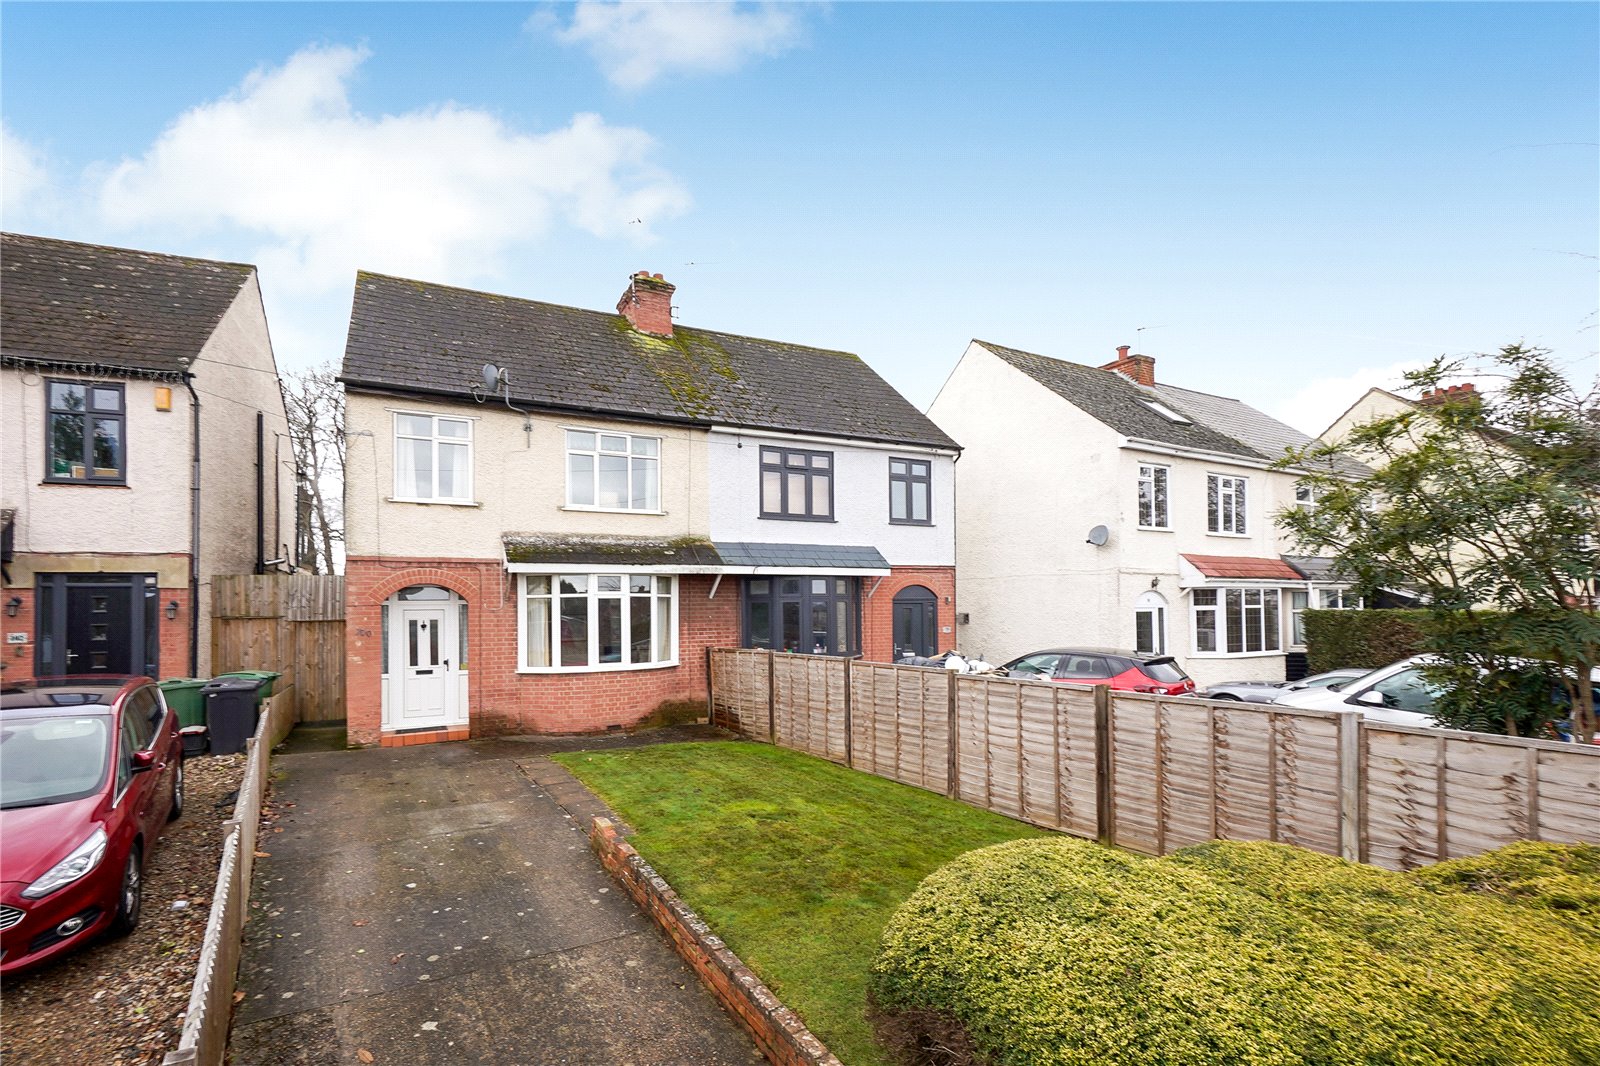 3 bed house for sale in Sutton Road, Maidstone, ME15